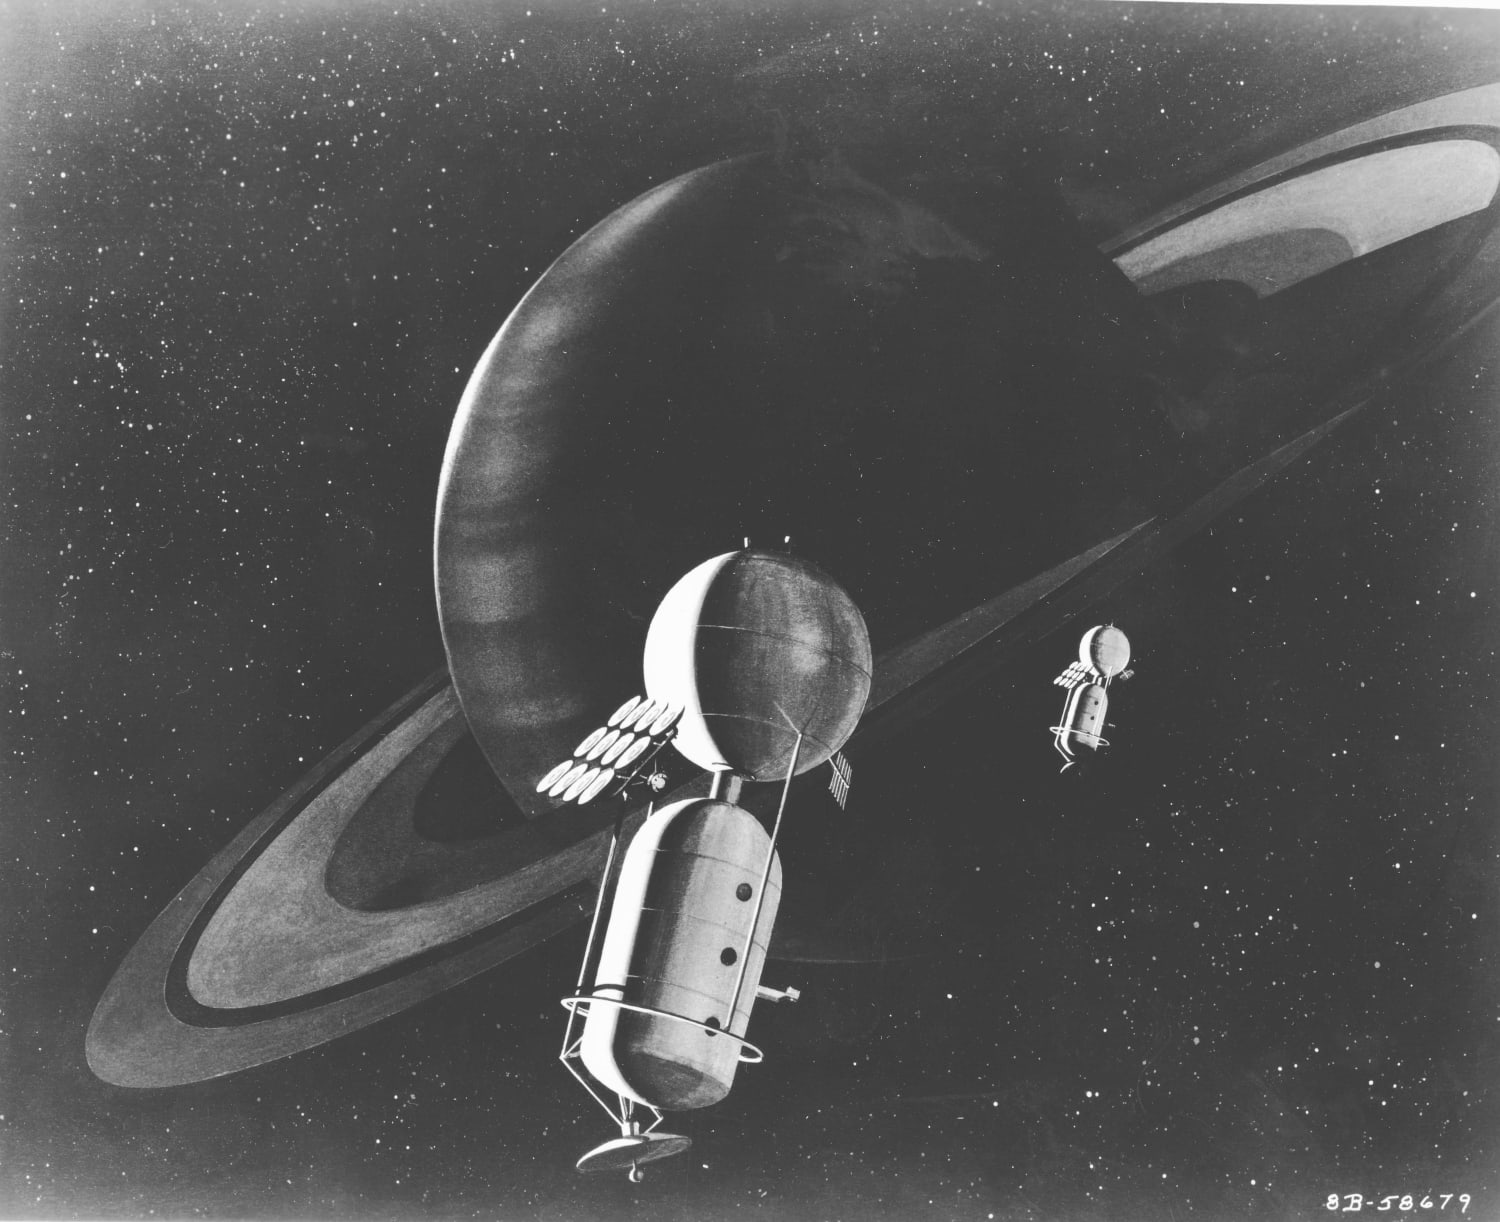 Martin Aviation "Saturn Expedition" by company artist Neil Gorsuch. c.1960